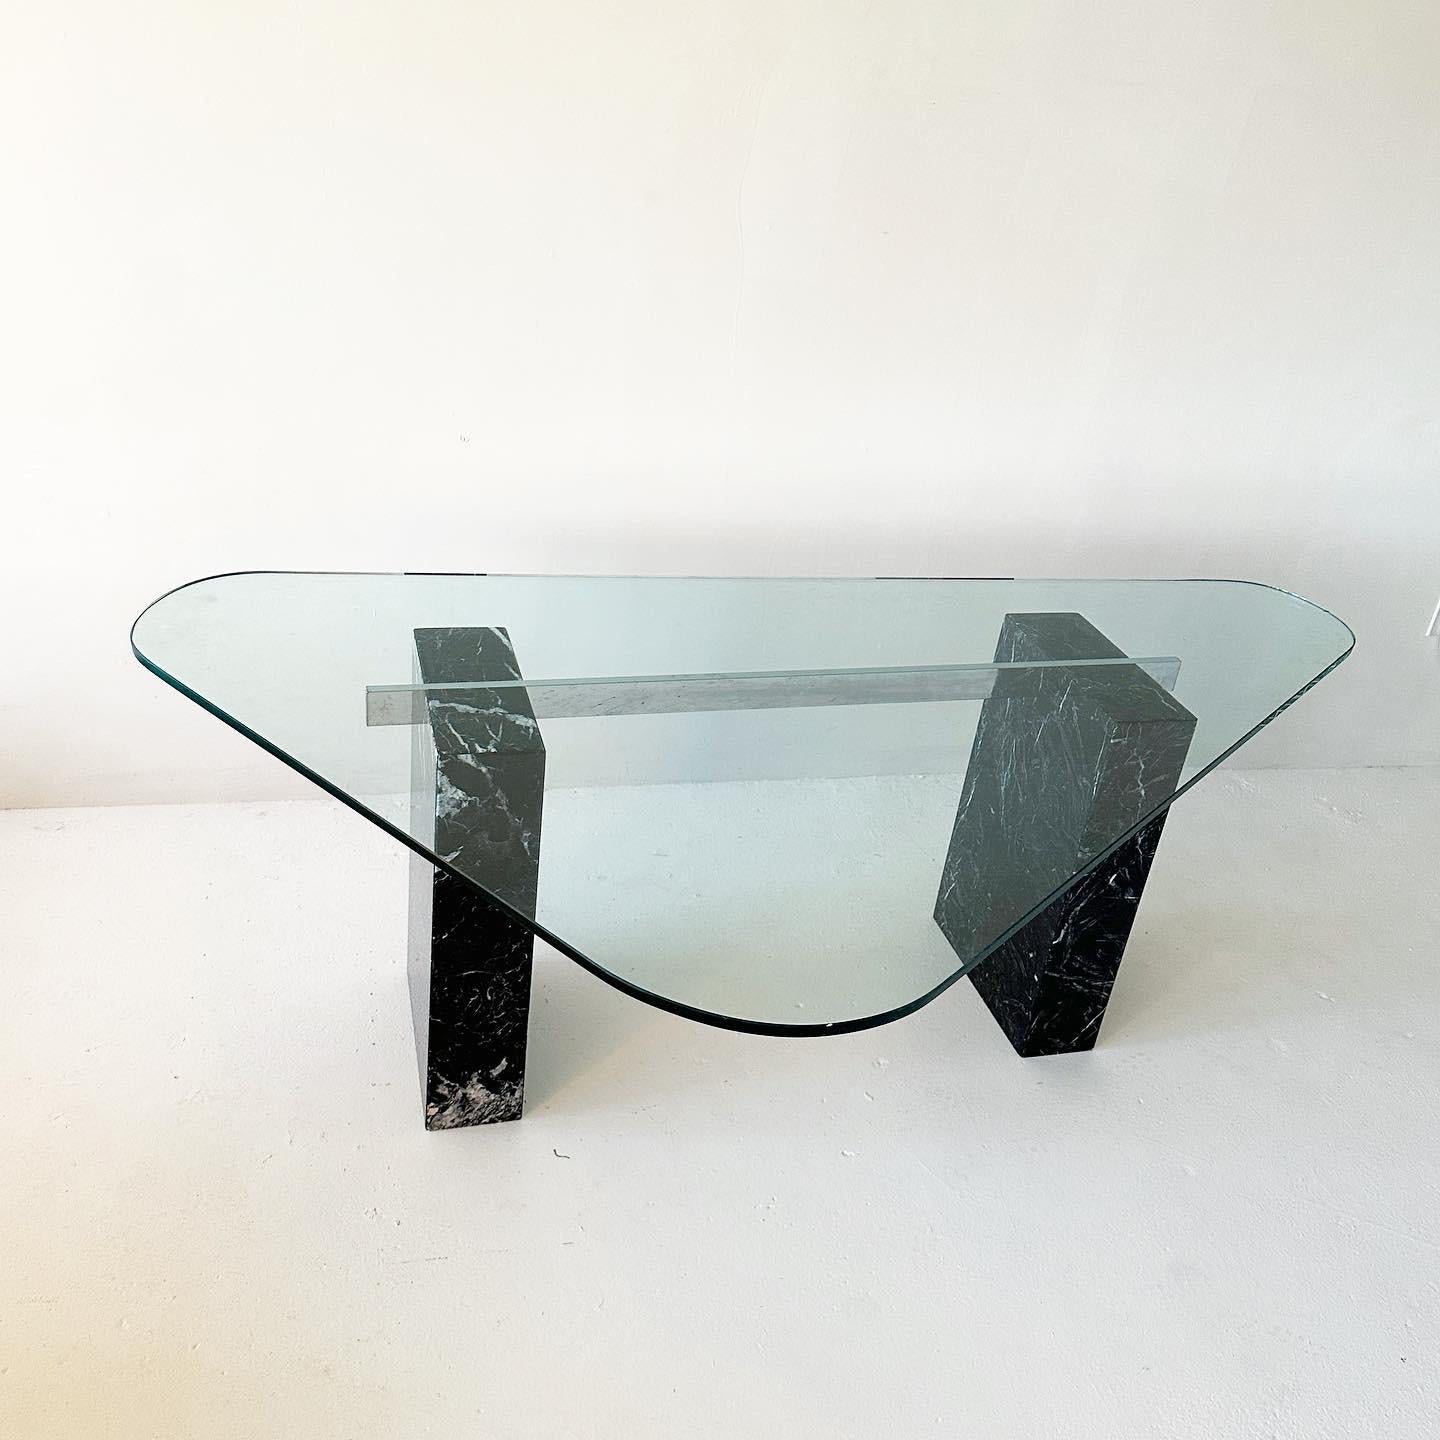 20th Century Postmodern Desk / Dining Table with Rounded Triangular Glass Top and Marble Legs For Sale